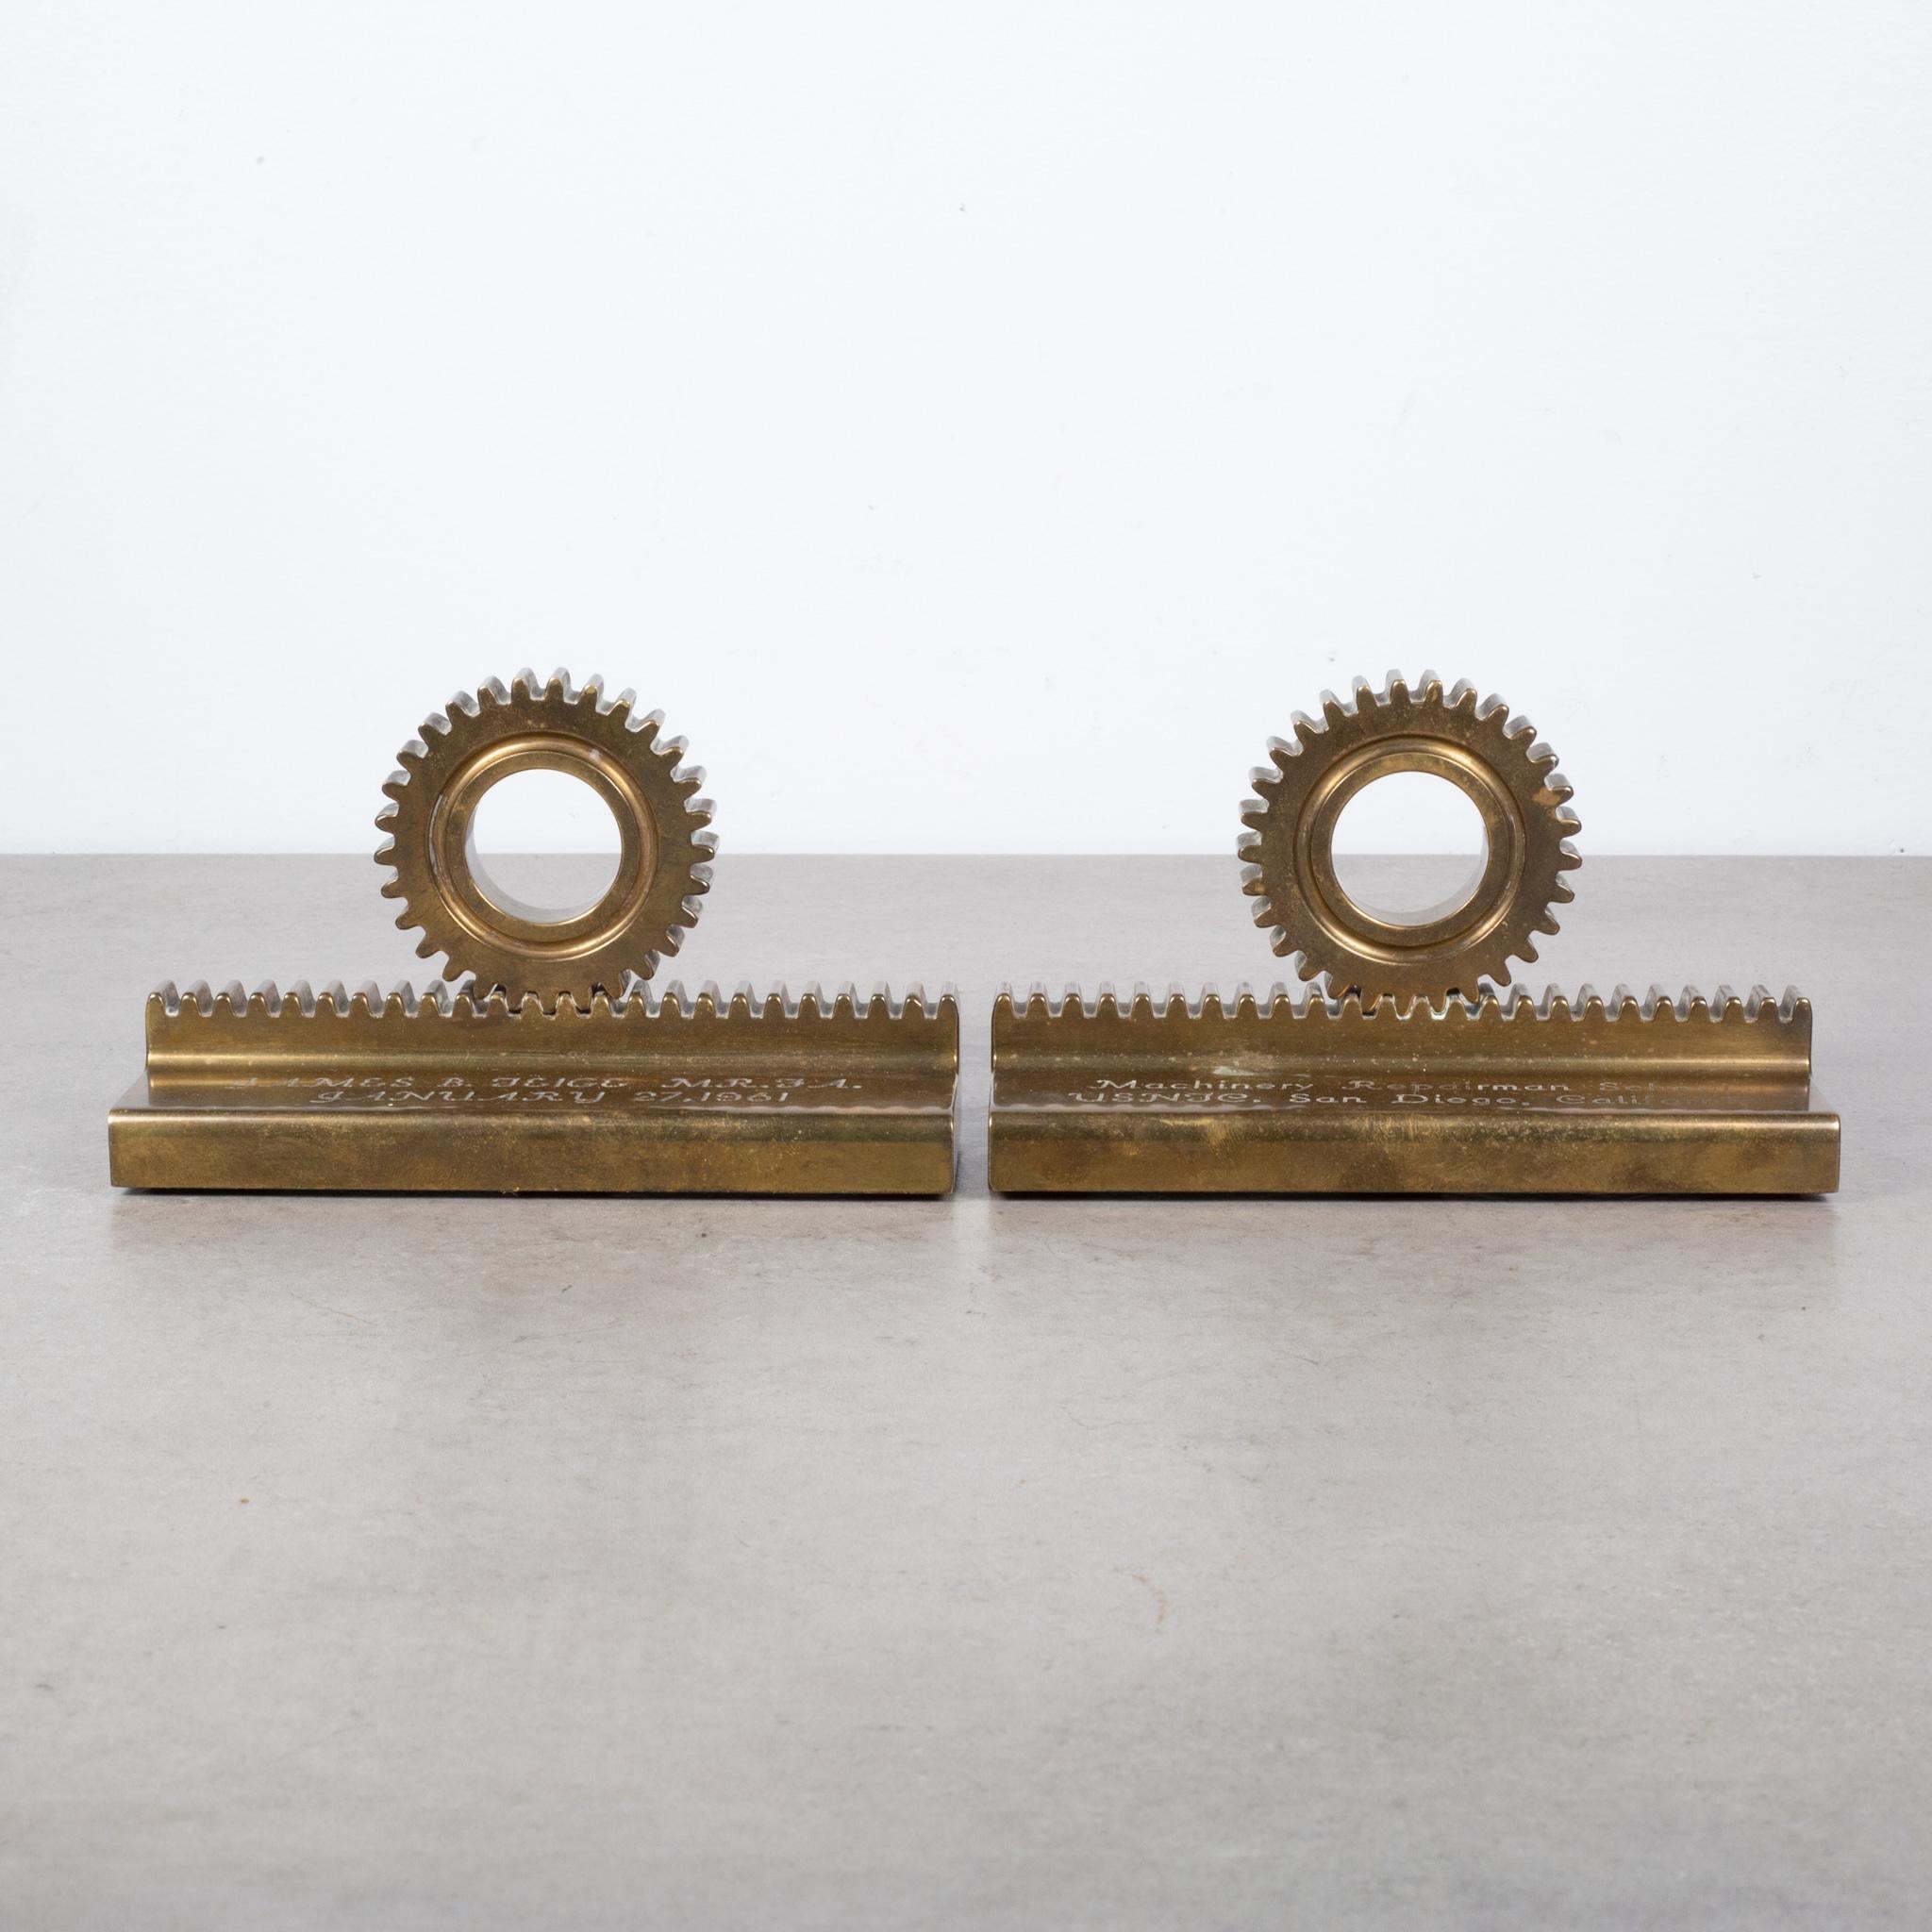 ABOUT

A pair of solid bronze gear bookends. Incised text on one dates them at January 27, 1961, and on the other appears the text Machinery Repairman School, USNJC San Diego, California.

 CREATOR Unknown.
 DATE OF MANUFACTURE c.1950.
